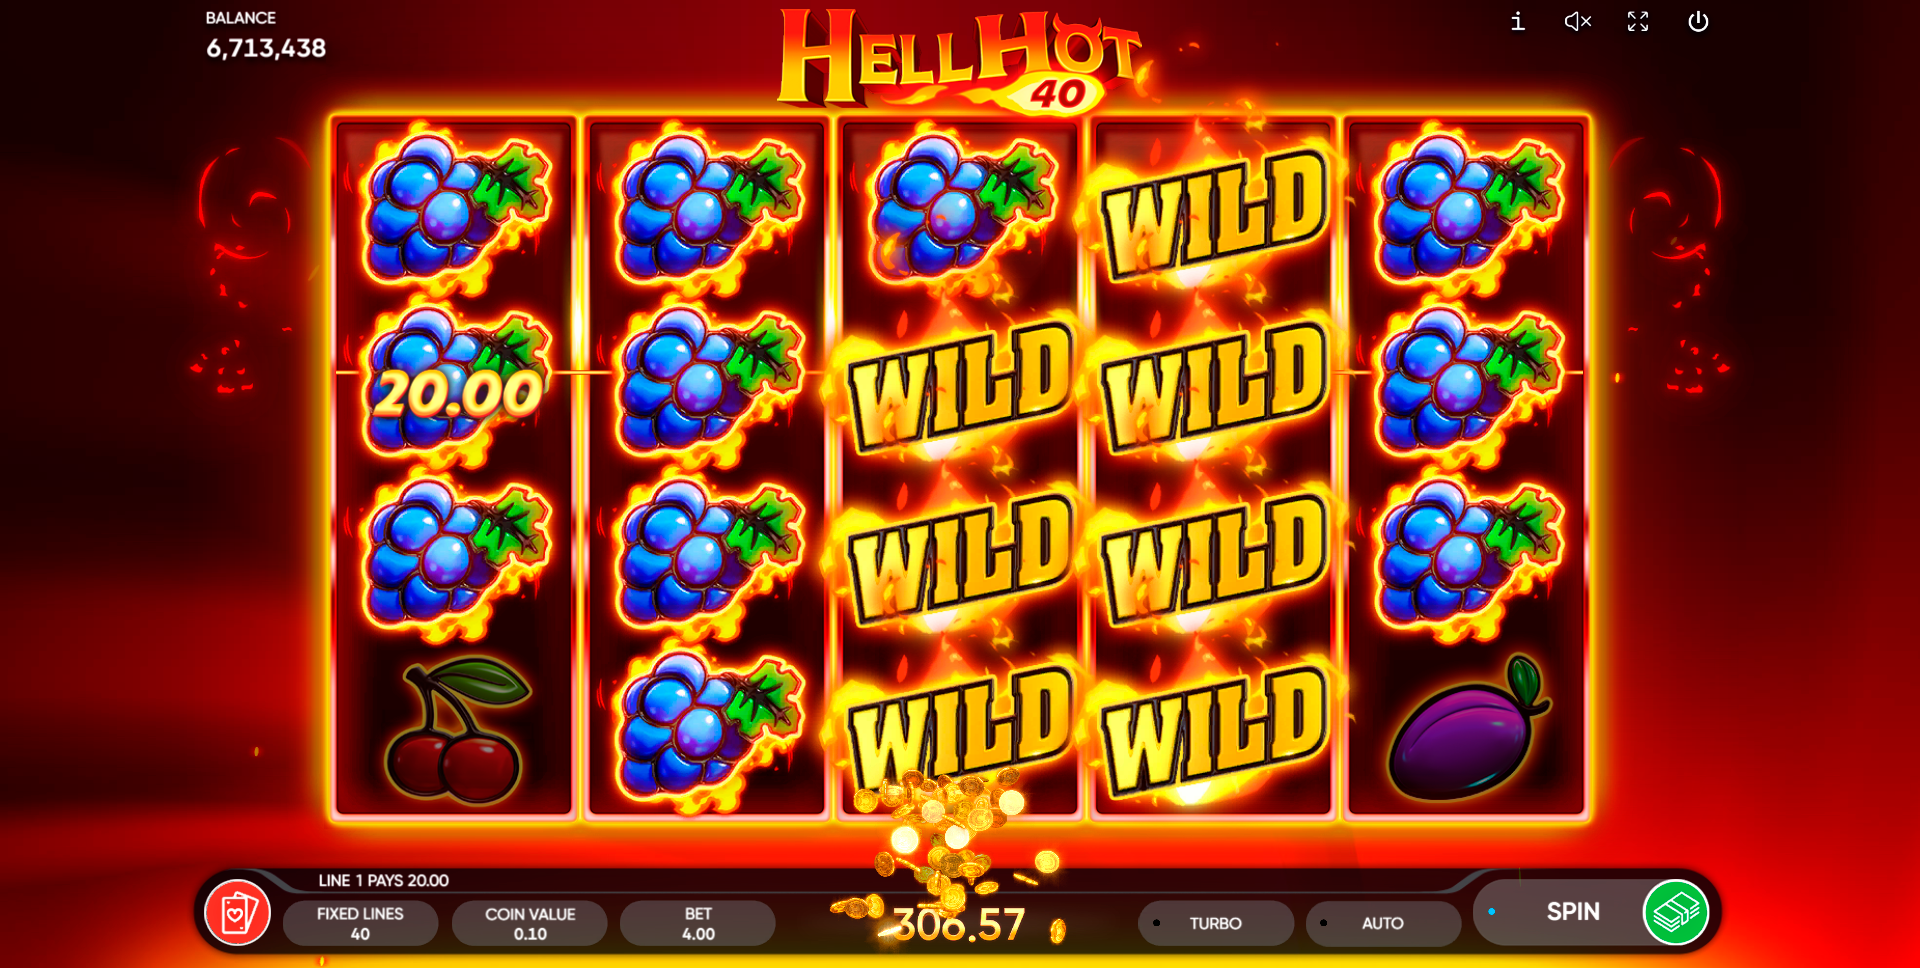 Win Money in Hell Hot 40 Free Slot Game by Endorphina